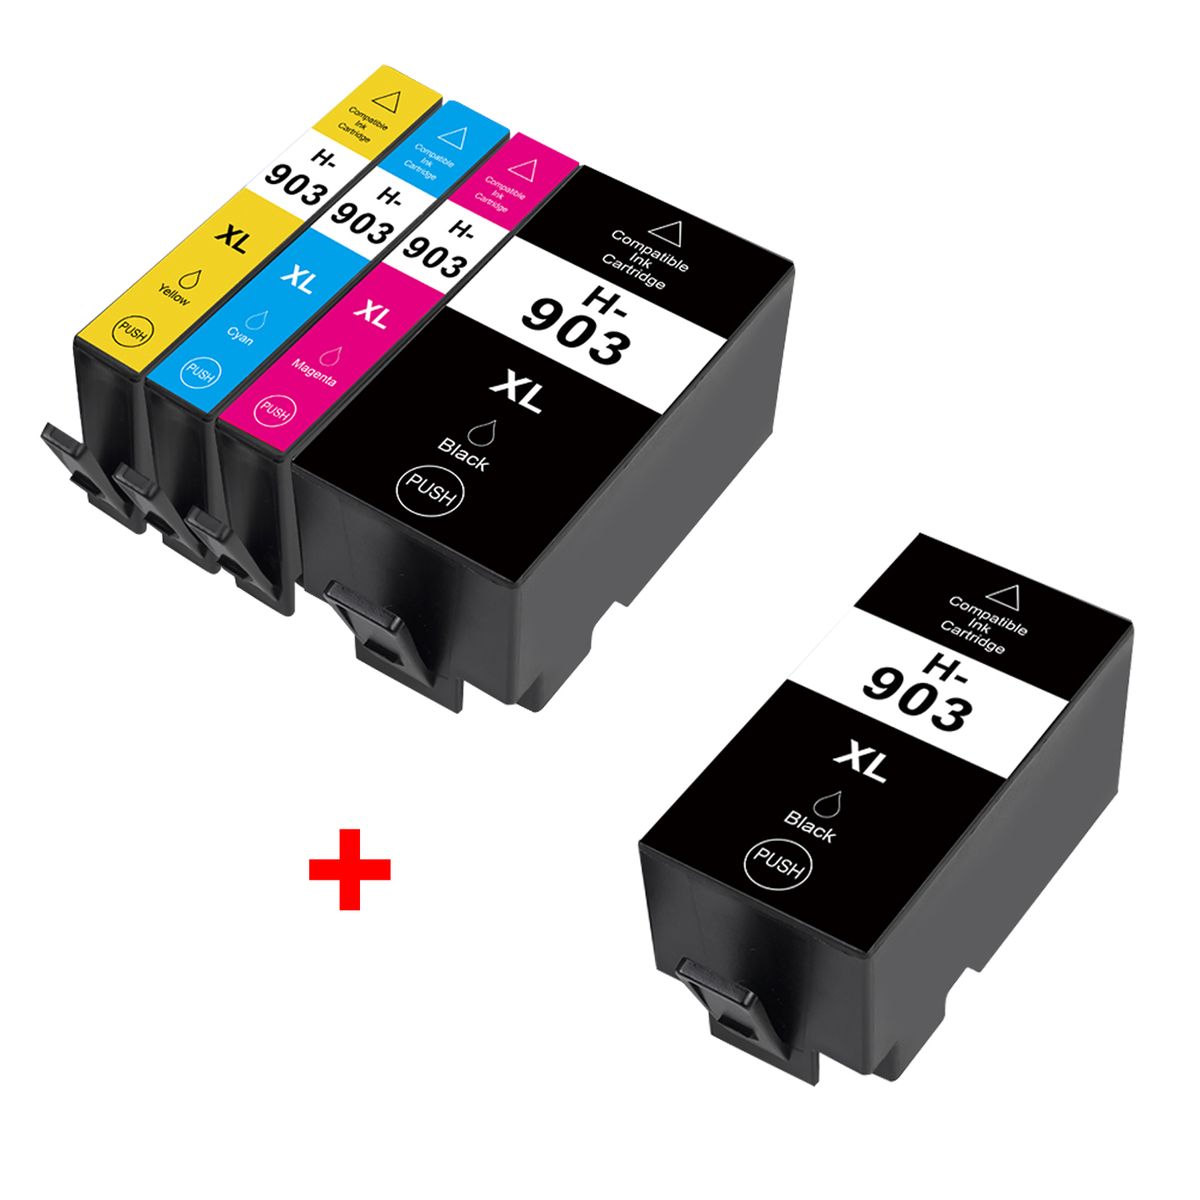 HP 912XL /912 Compatible Inkjet Cartridges - Multipack, Shop Today. Get it  Tomorrow!